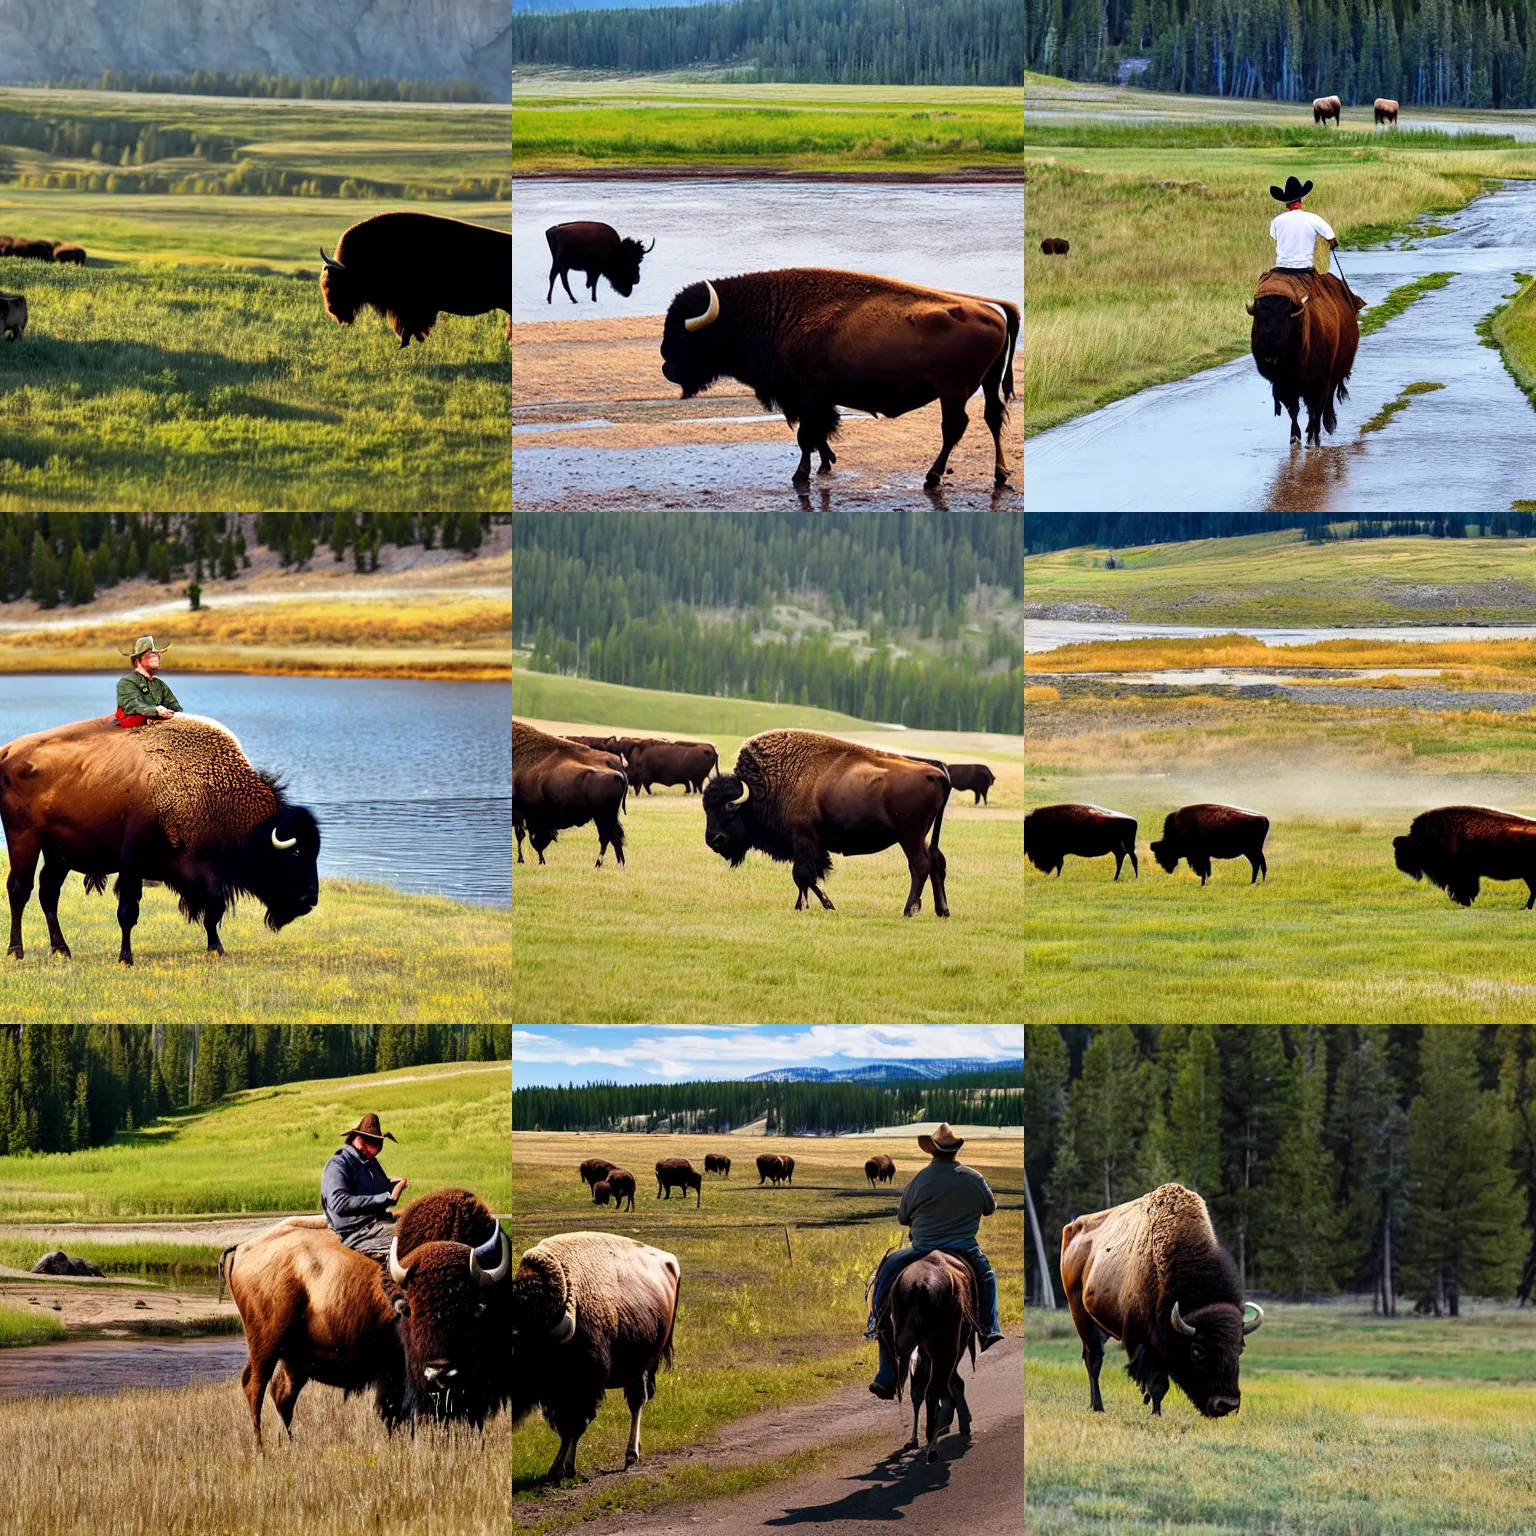 Prompt: Farmer riding bison Yellowstone